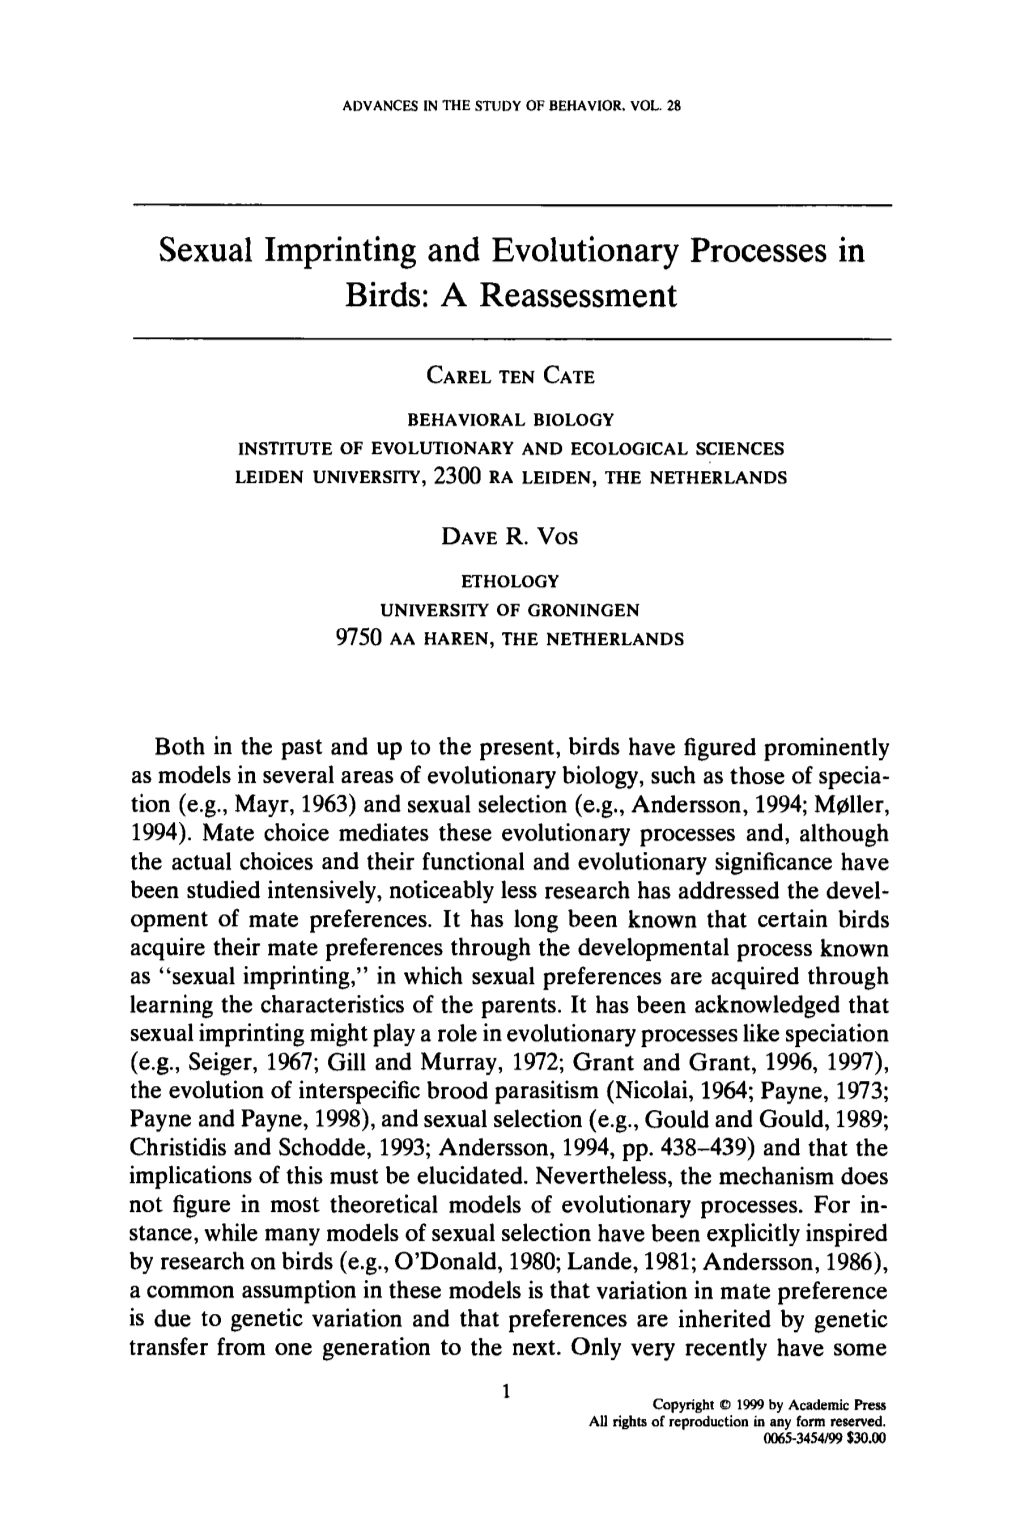 Sexual Imprinting and Evolutionary Processes in Birds: a Reassessment